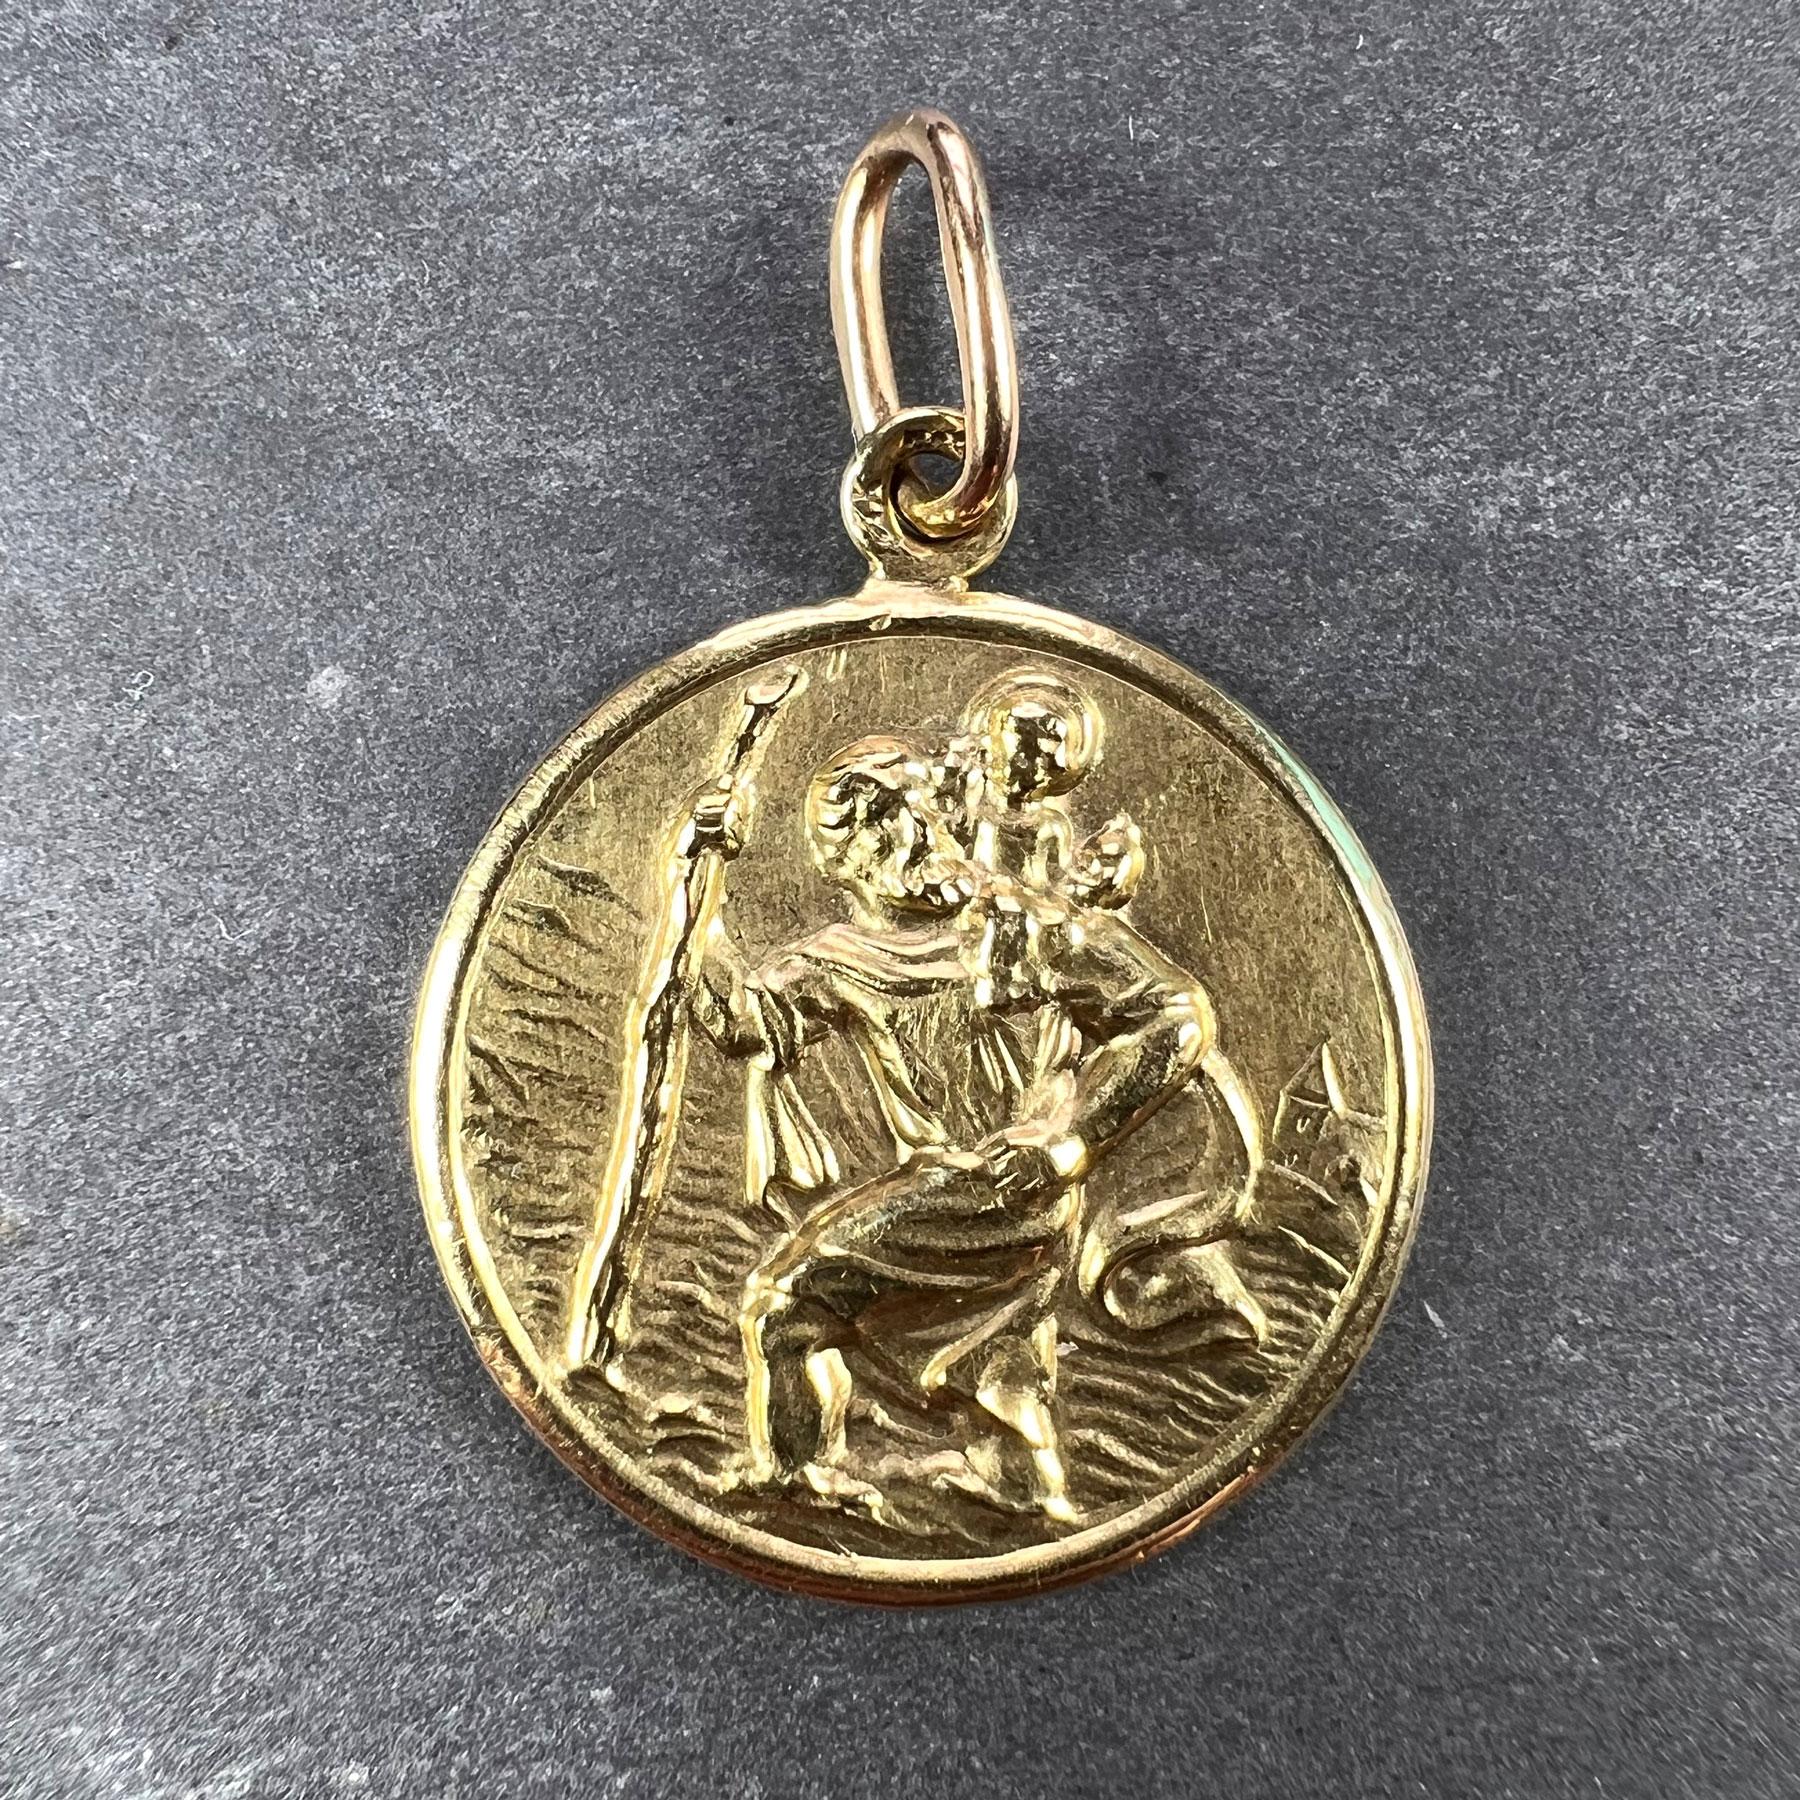 A 14 karat (14K) yellow gold charm pendant designed as a medal depicting Saint Christopher carrying the infant Christ over a river. Engraved ‘Mummy and Daddy’ to the reverse. Stamped 585 for 14 karat gold.

Dimensions: 2.3 x 2 x 0.2 cm (not